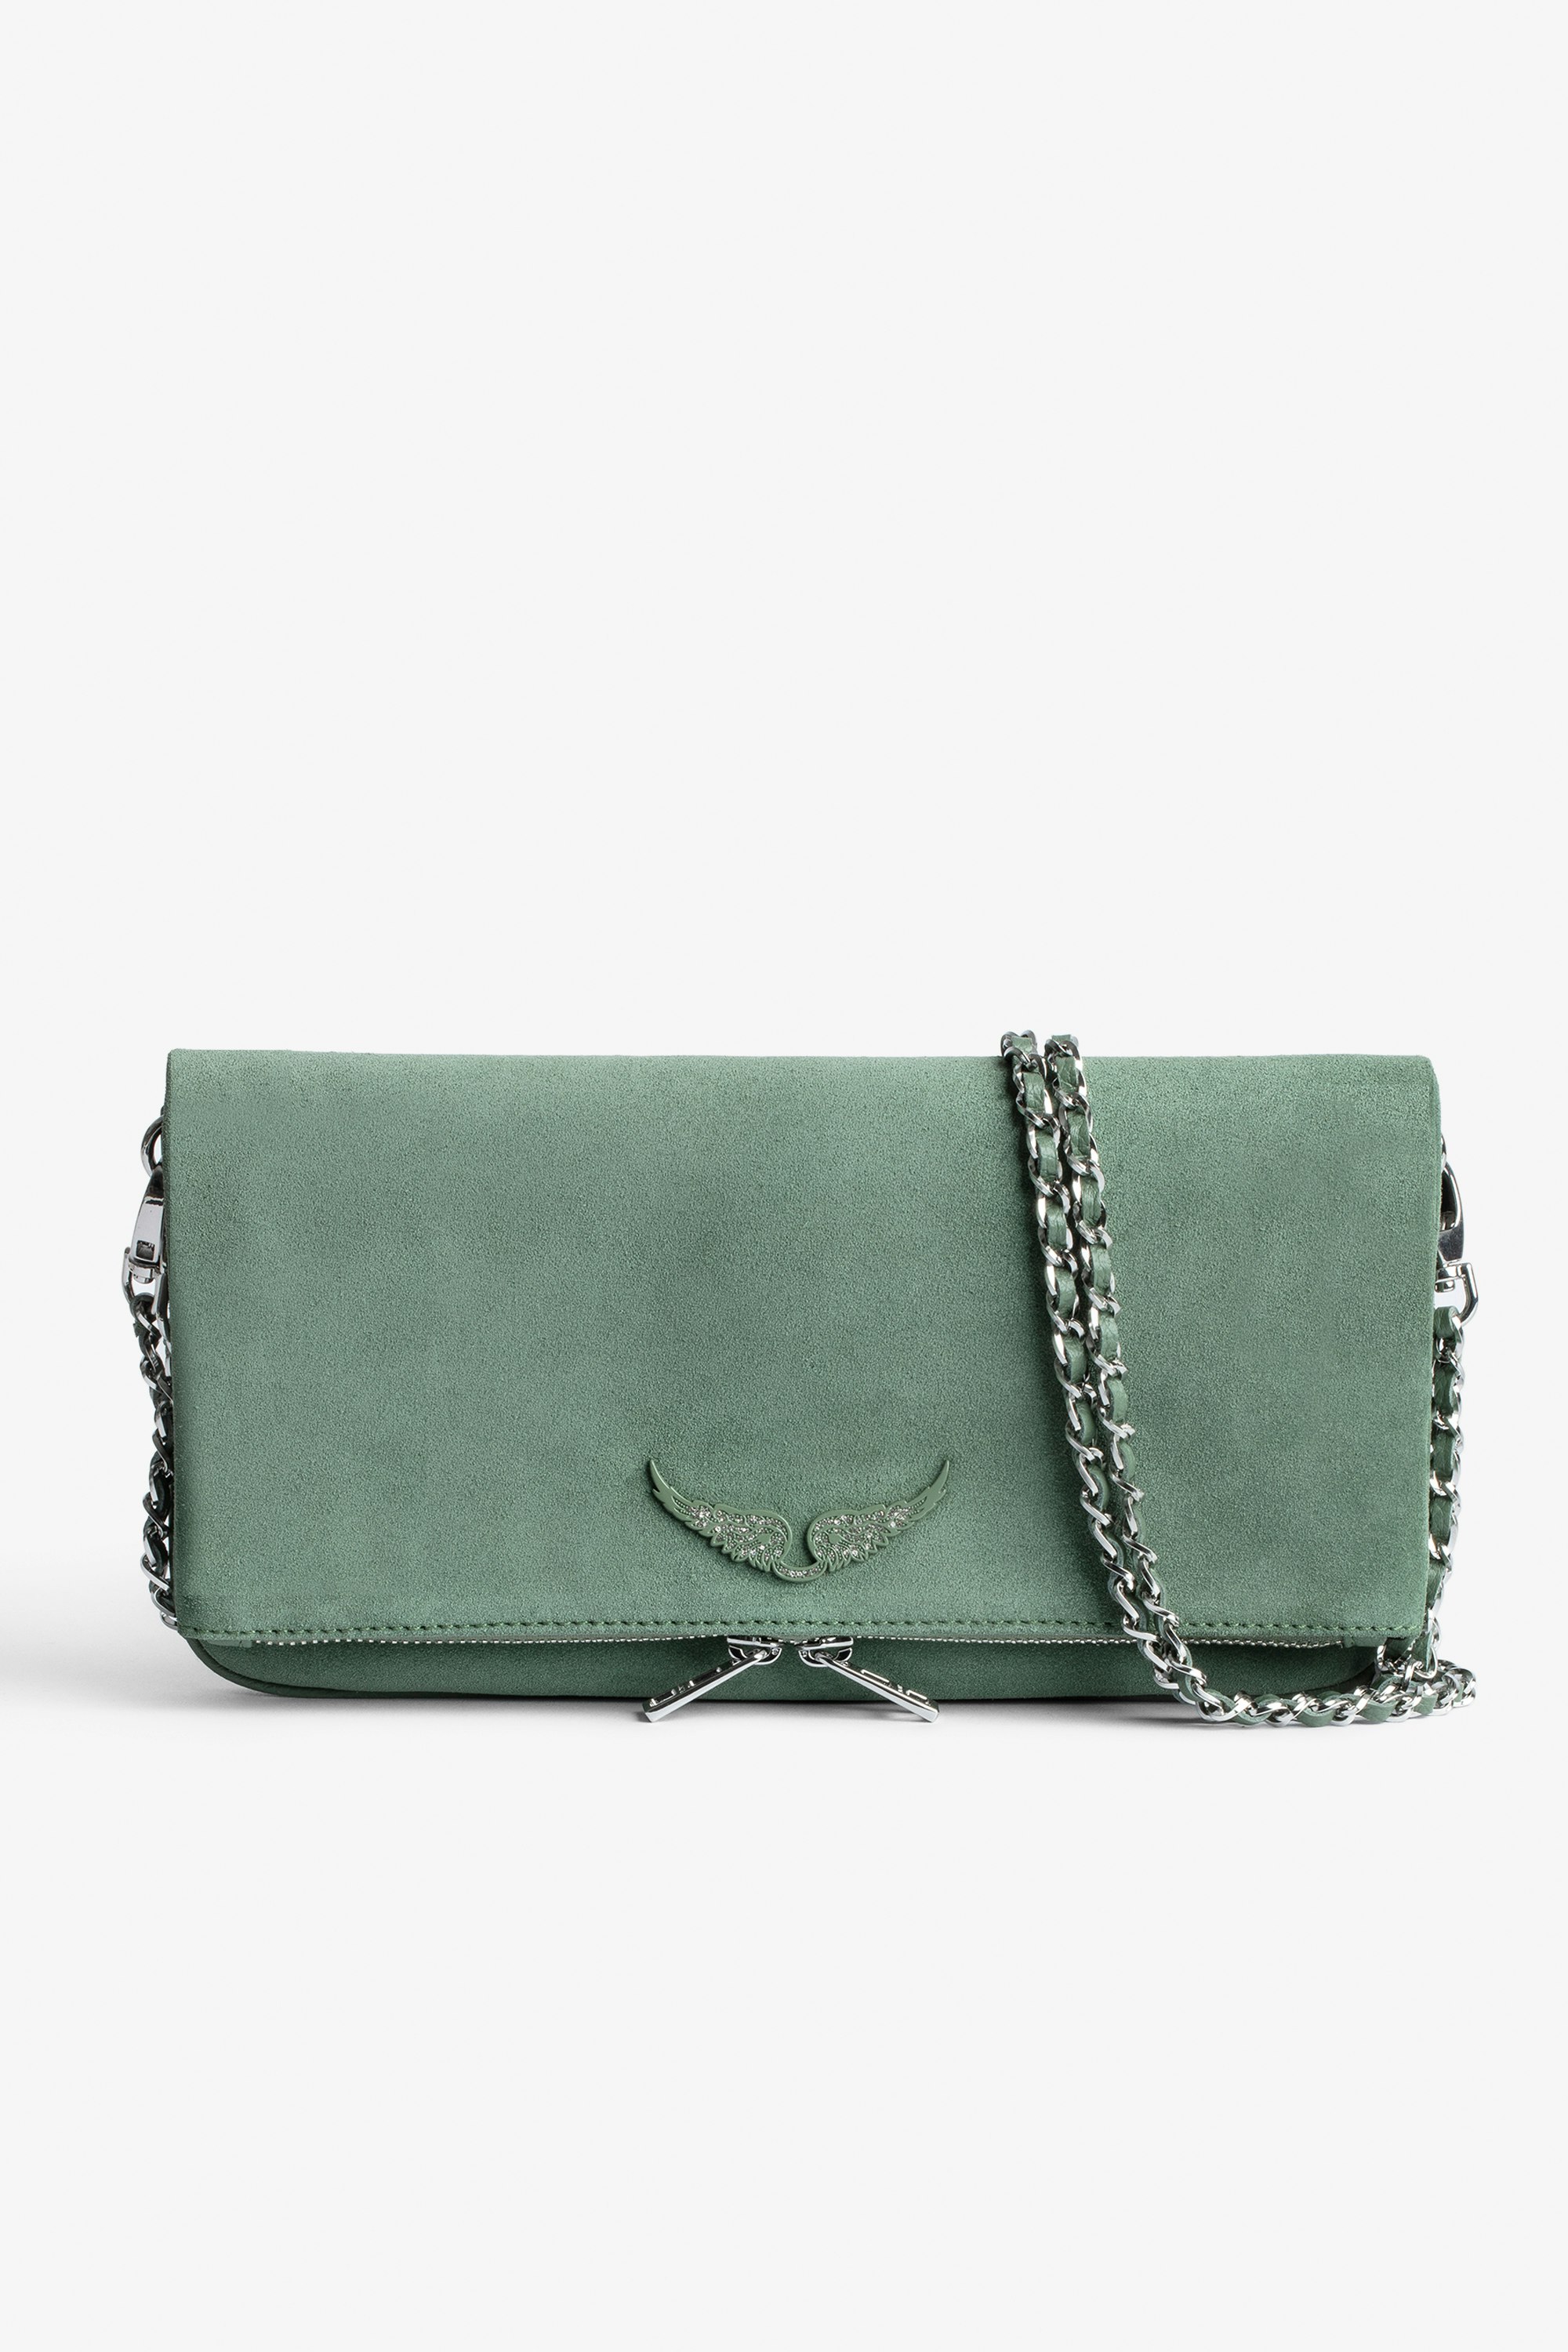 Rock Suede Clutch Women's khaki suede clutch bag with double leather-and-metal chain